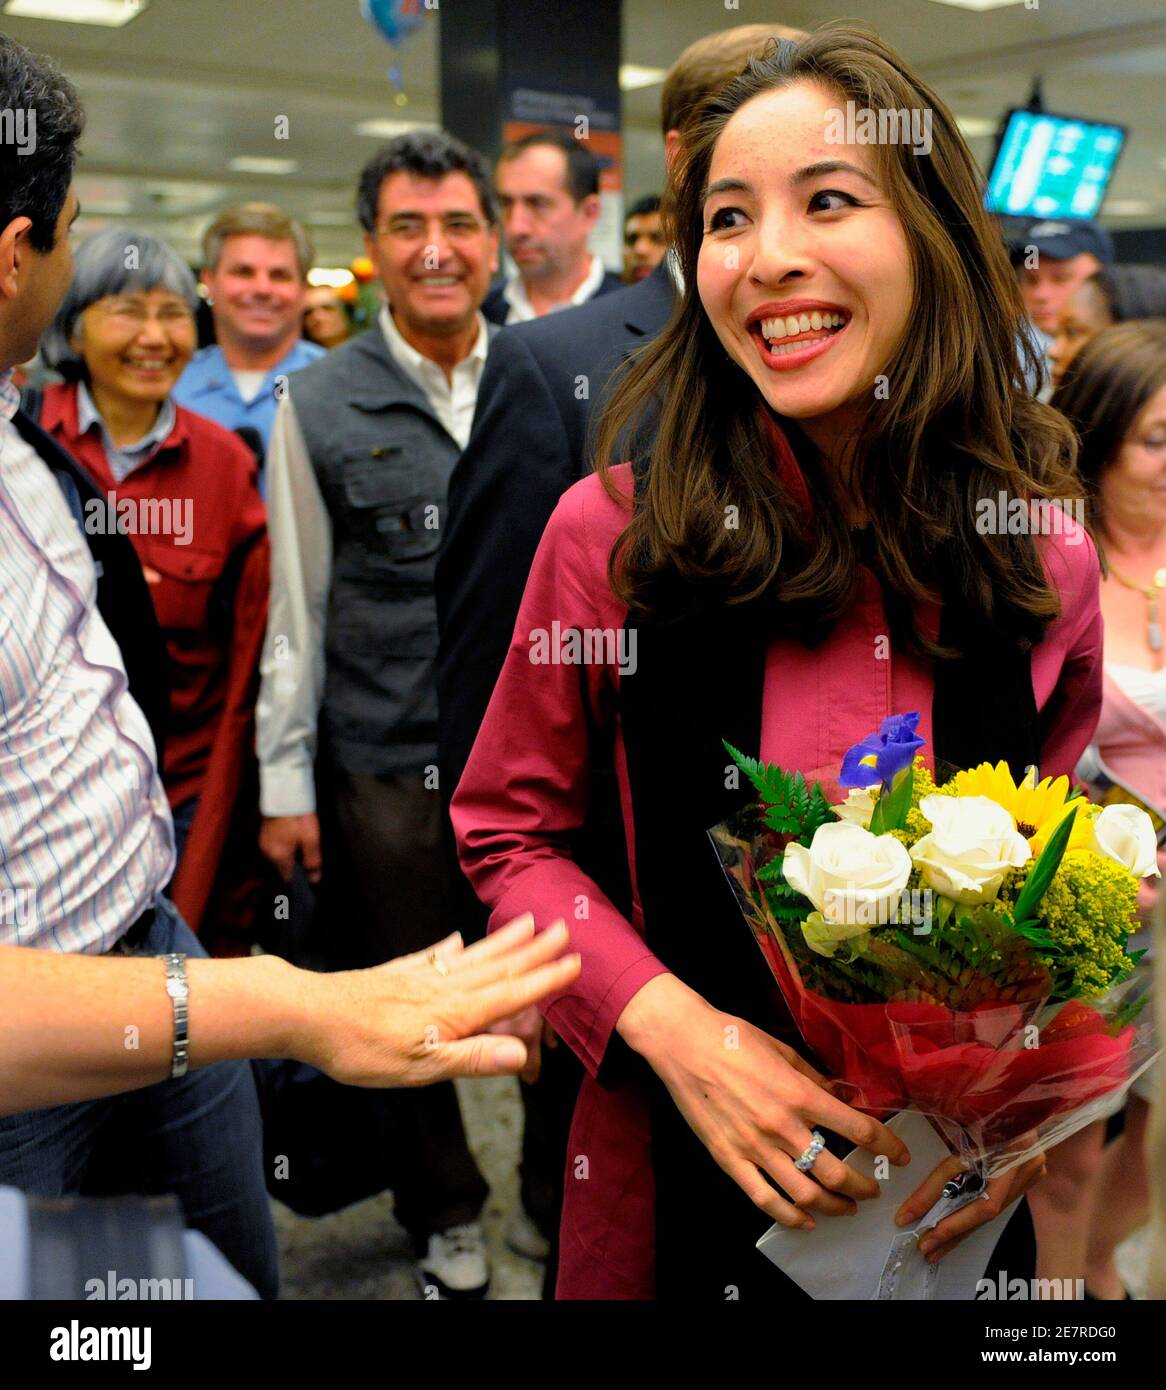 American-born journalist Roxana Saberi, who was jailed for four months by Iran on charges of espionage and later released, is greeted by flowers as she arrives at Washington Dulles International Airport, Chantilly, Virginia, May 22, 2009. Her Iranian-born father, Reza, is in rear with gray vest and her mother, Akiko, is behind him.  REUTERS/Mike Theiler (UNITED STATES) Stock Photo